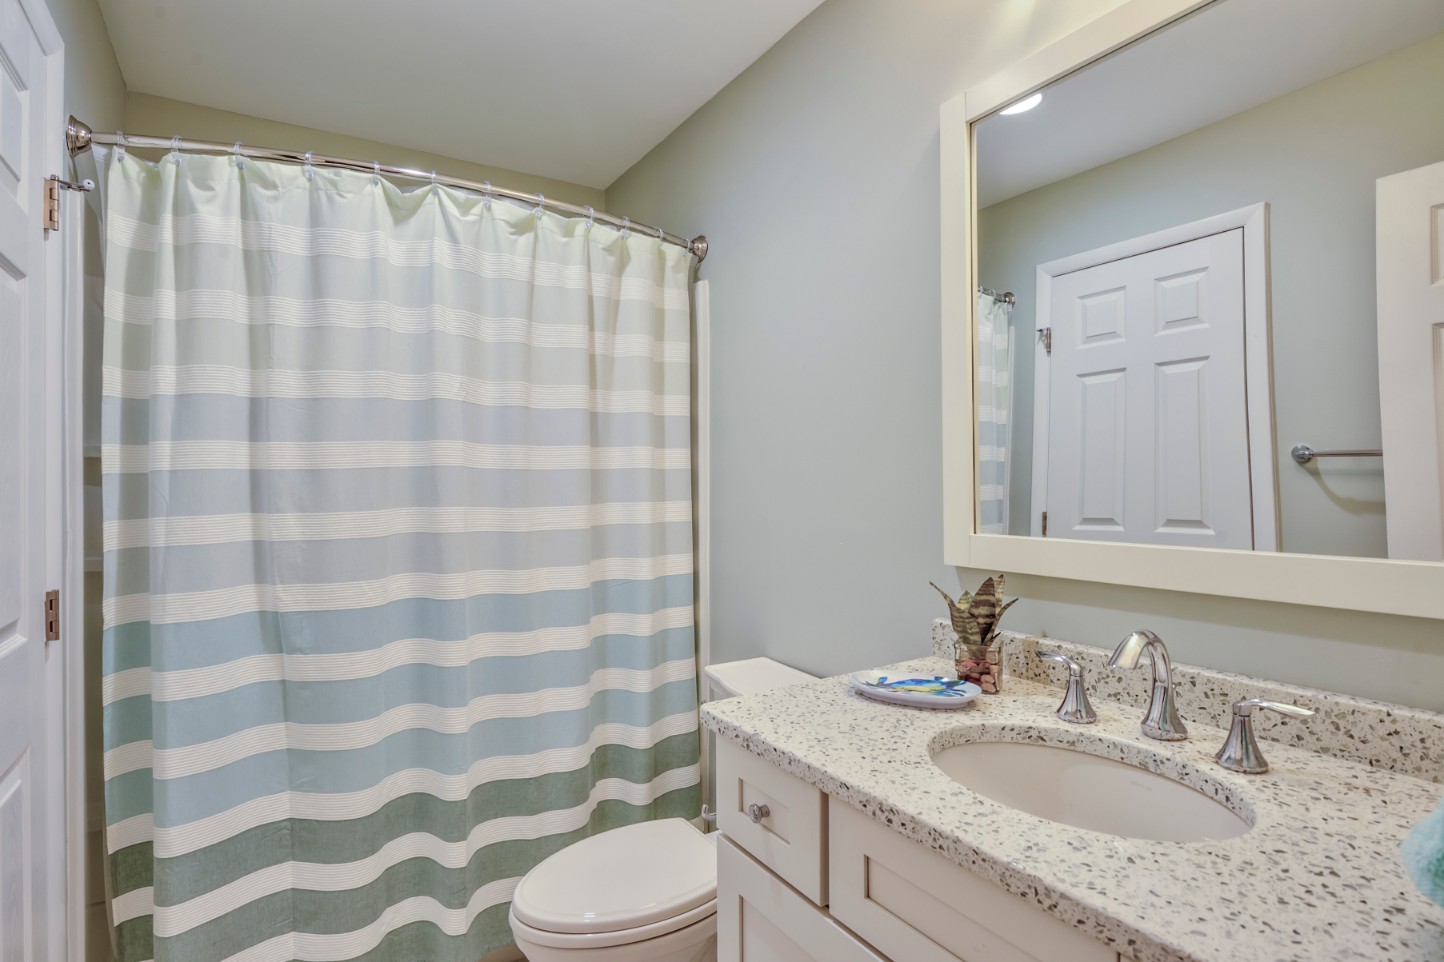 Canal Way Renovation in Bethany Beach DE - Bathroom with Shower Curtain and White Rectangular Mirror